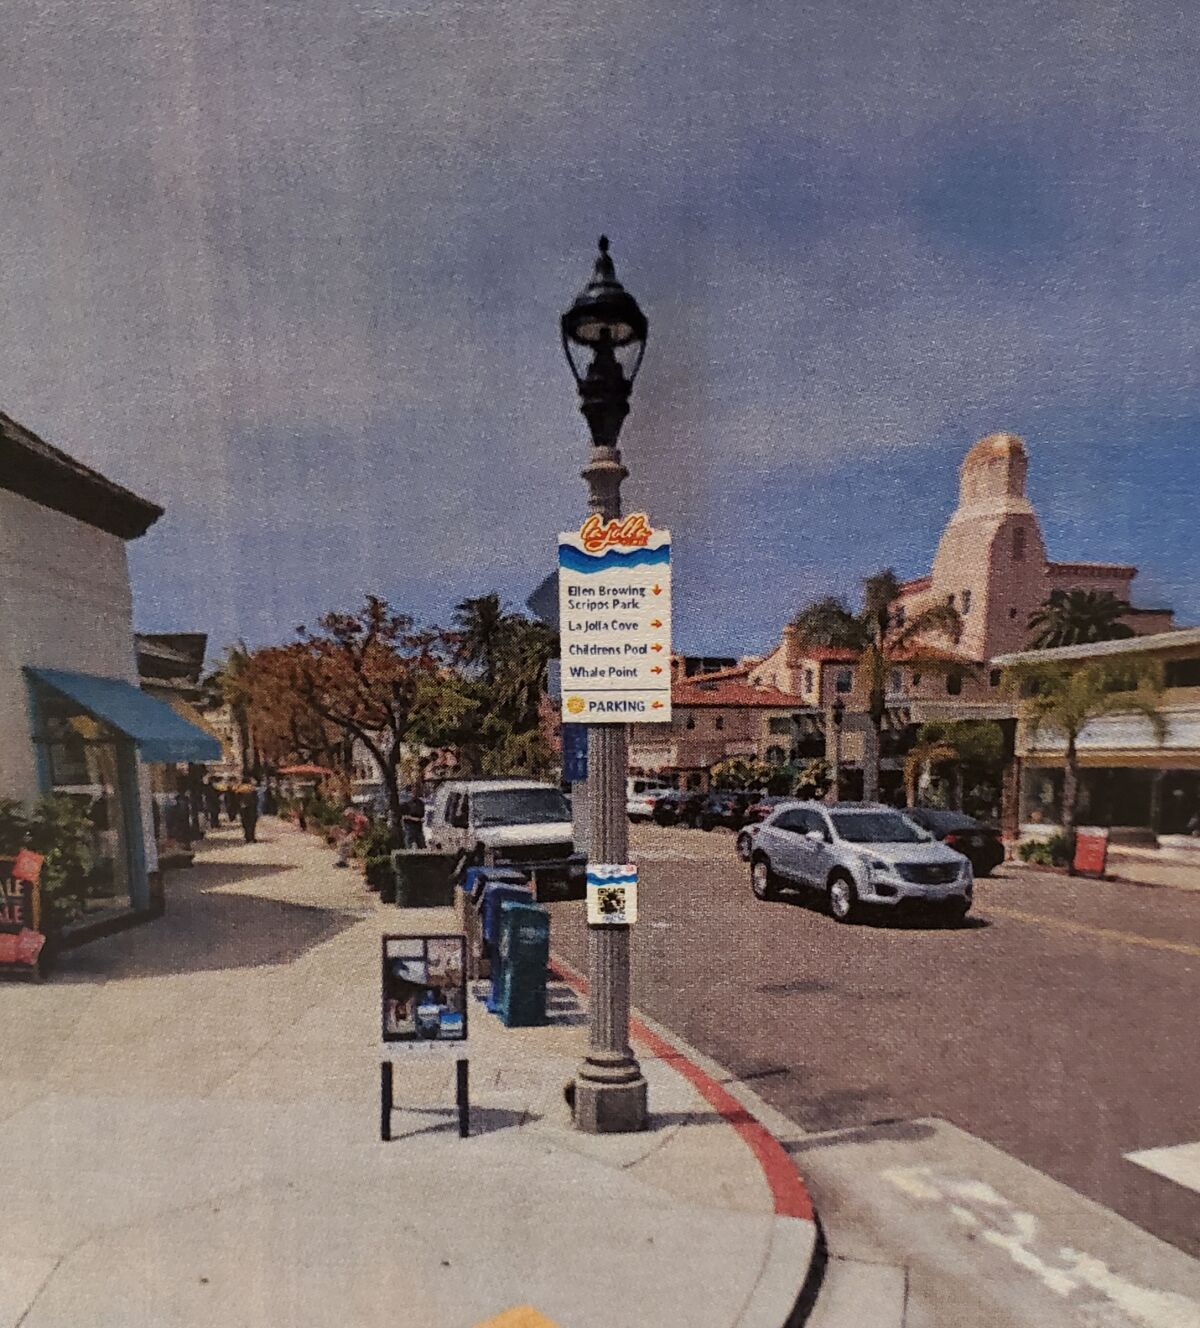 A rendering shows a directional sign superimposed on a lamppost.